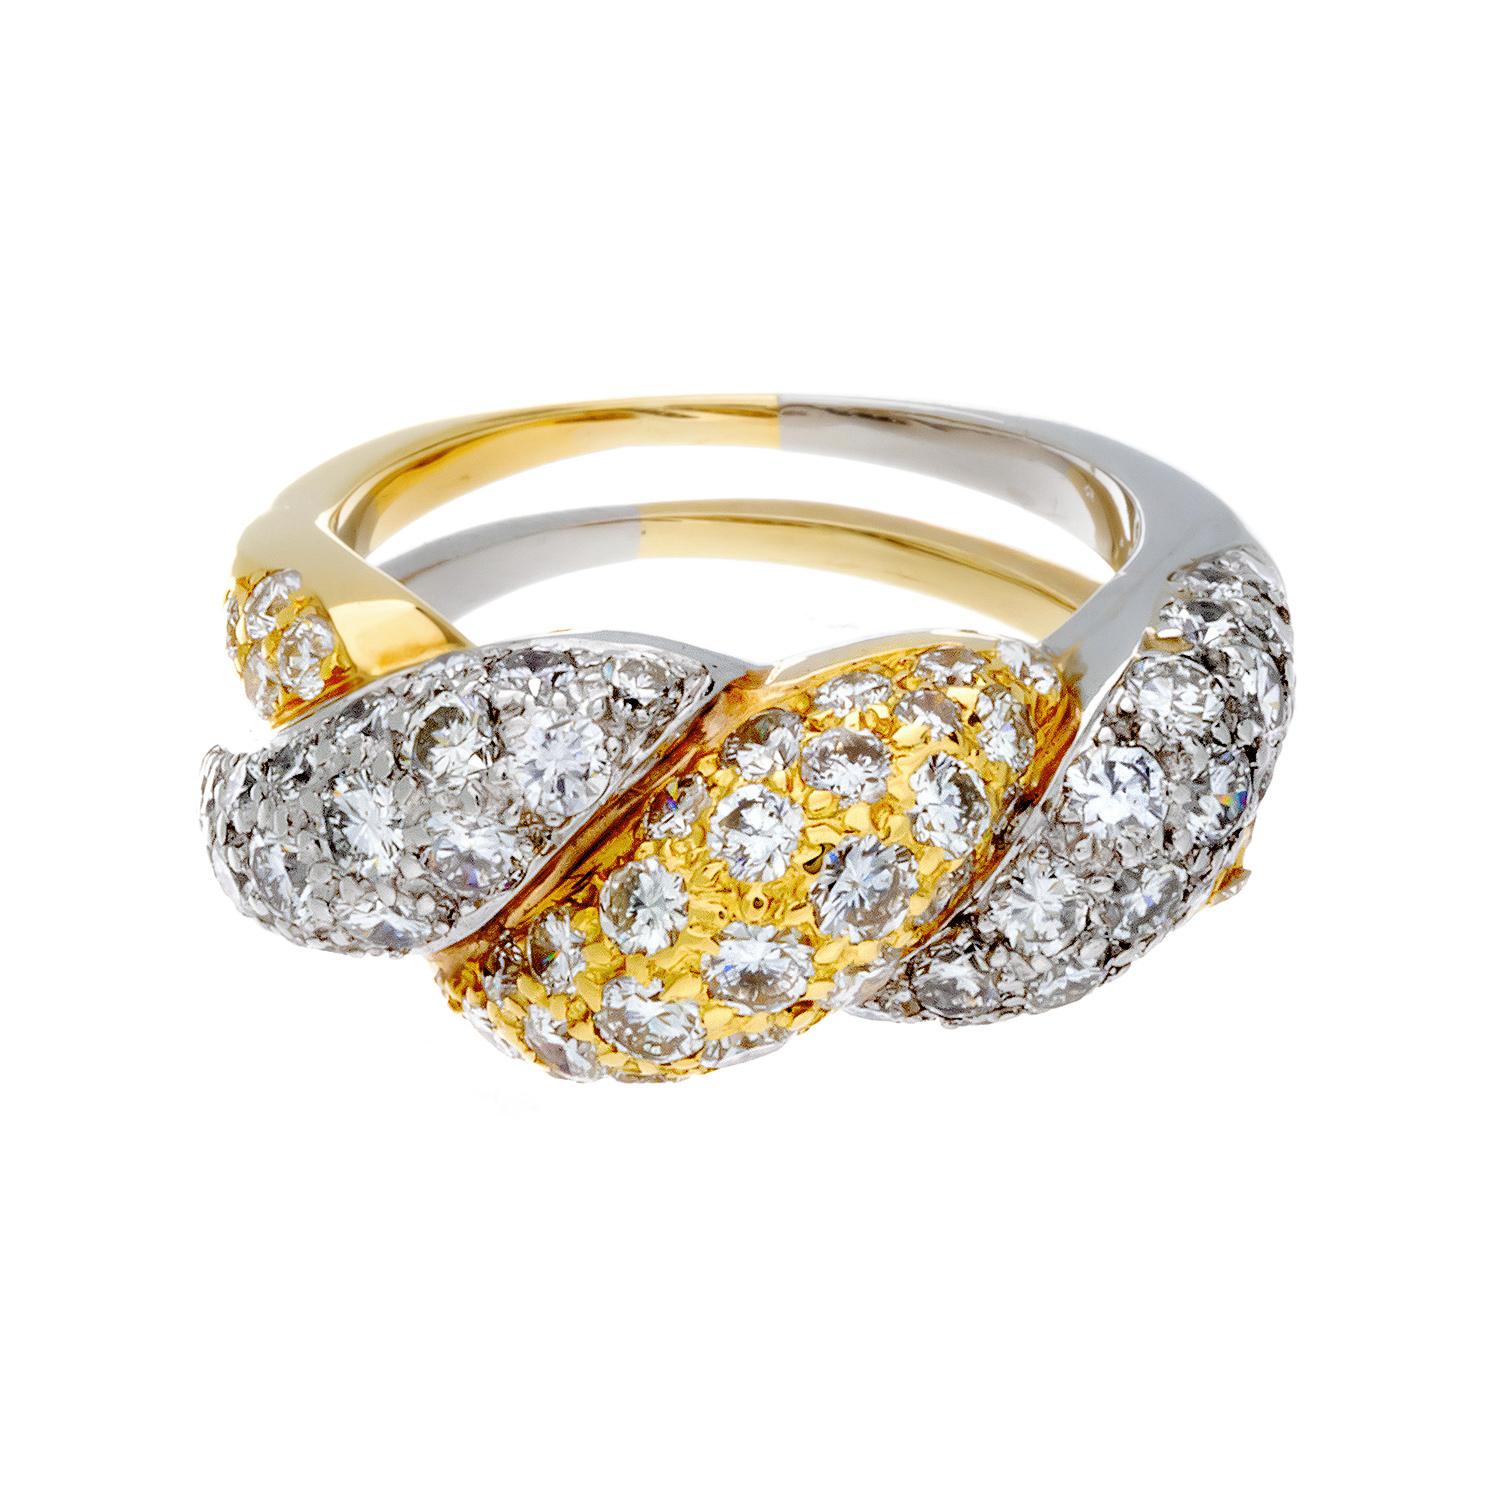 Platinum & 18 Kt Yellow Gold Pave' Diamond Woven Dome Ring. Set With 76 Diamonds to total  1.90 Carats. 
Clarity:   VS Clarity
Color:    F- G Color